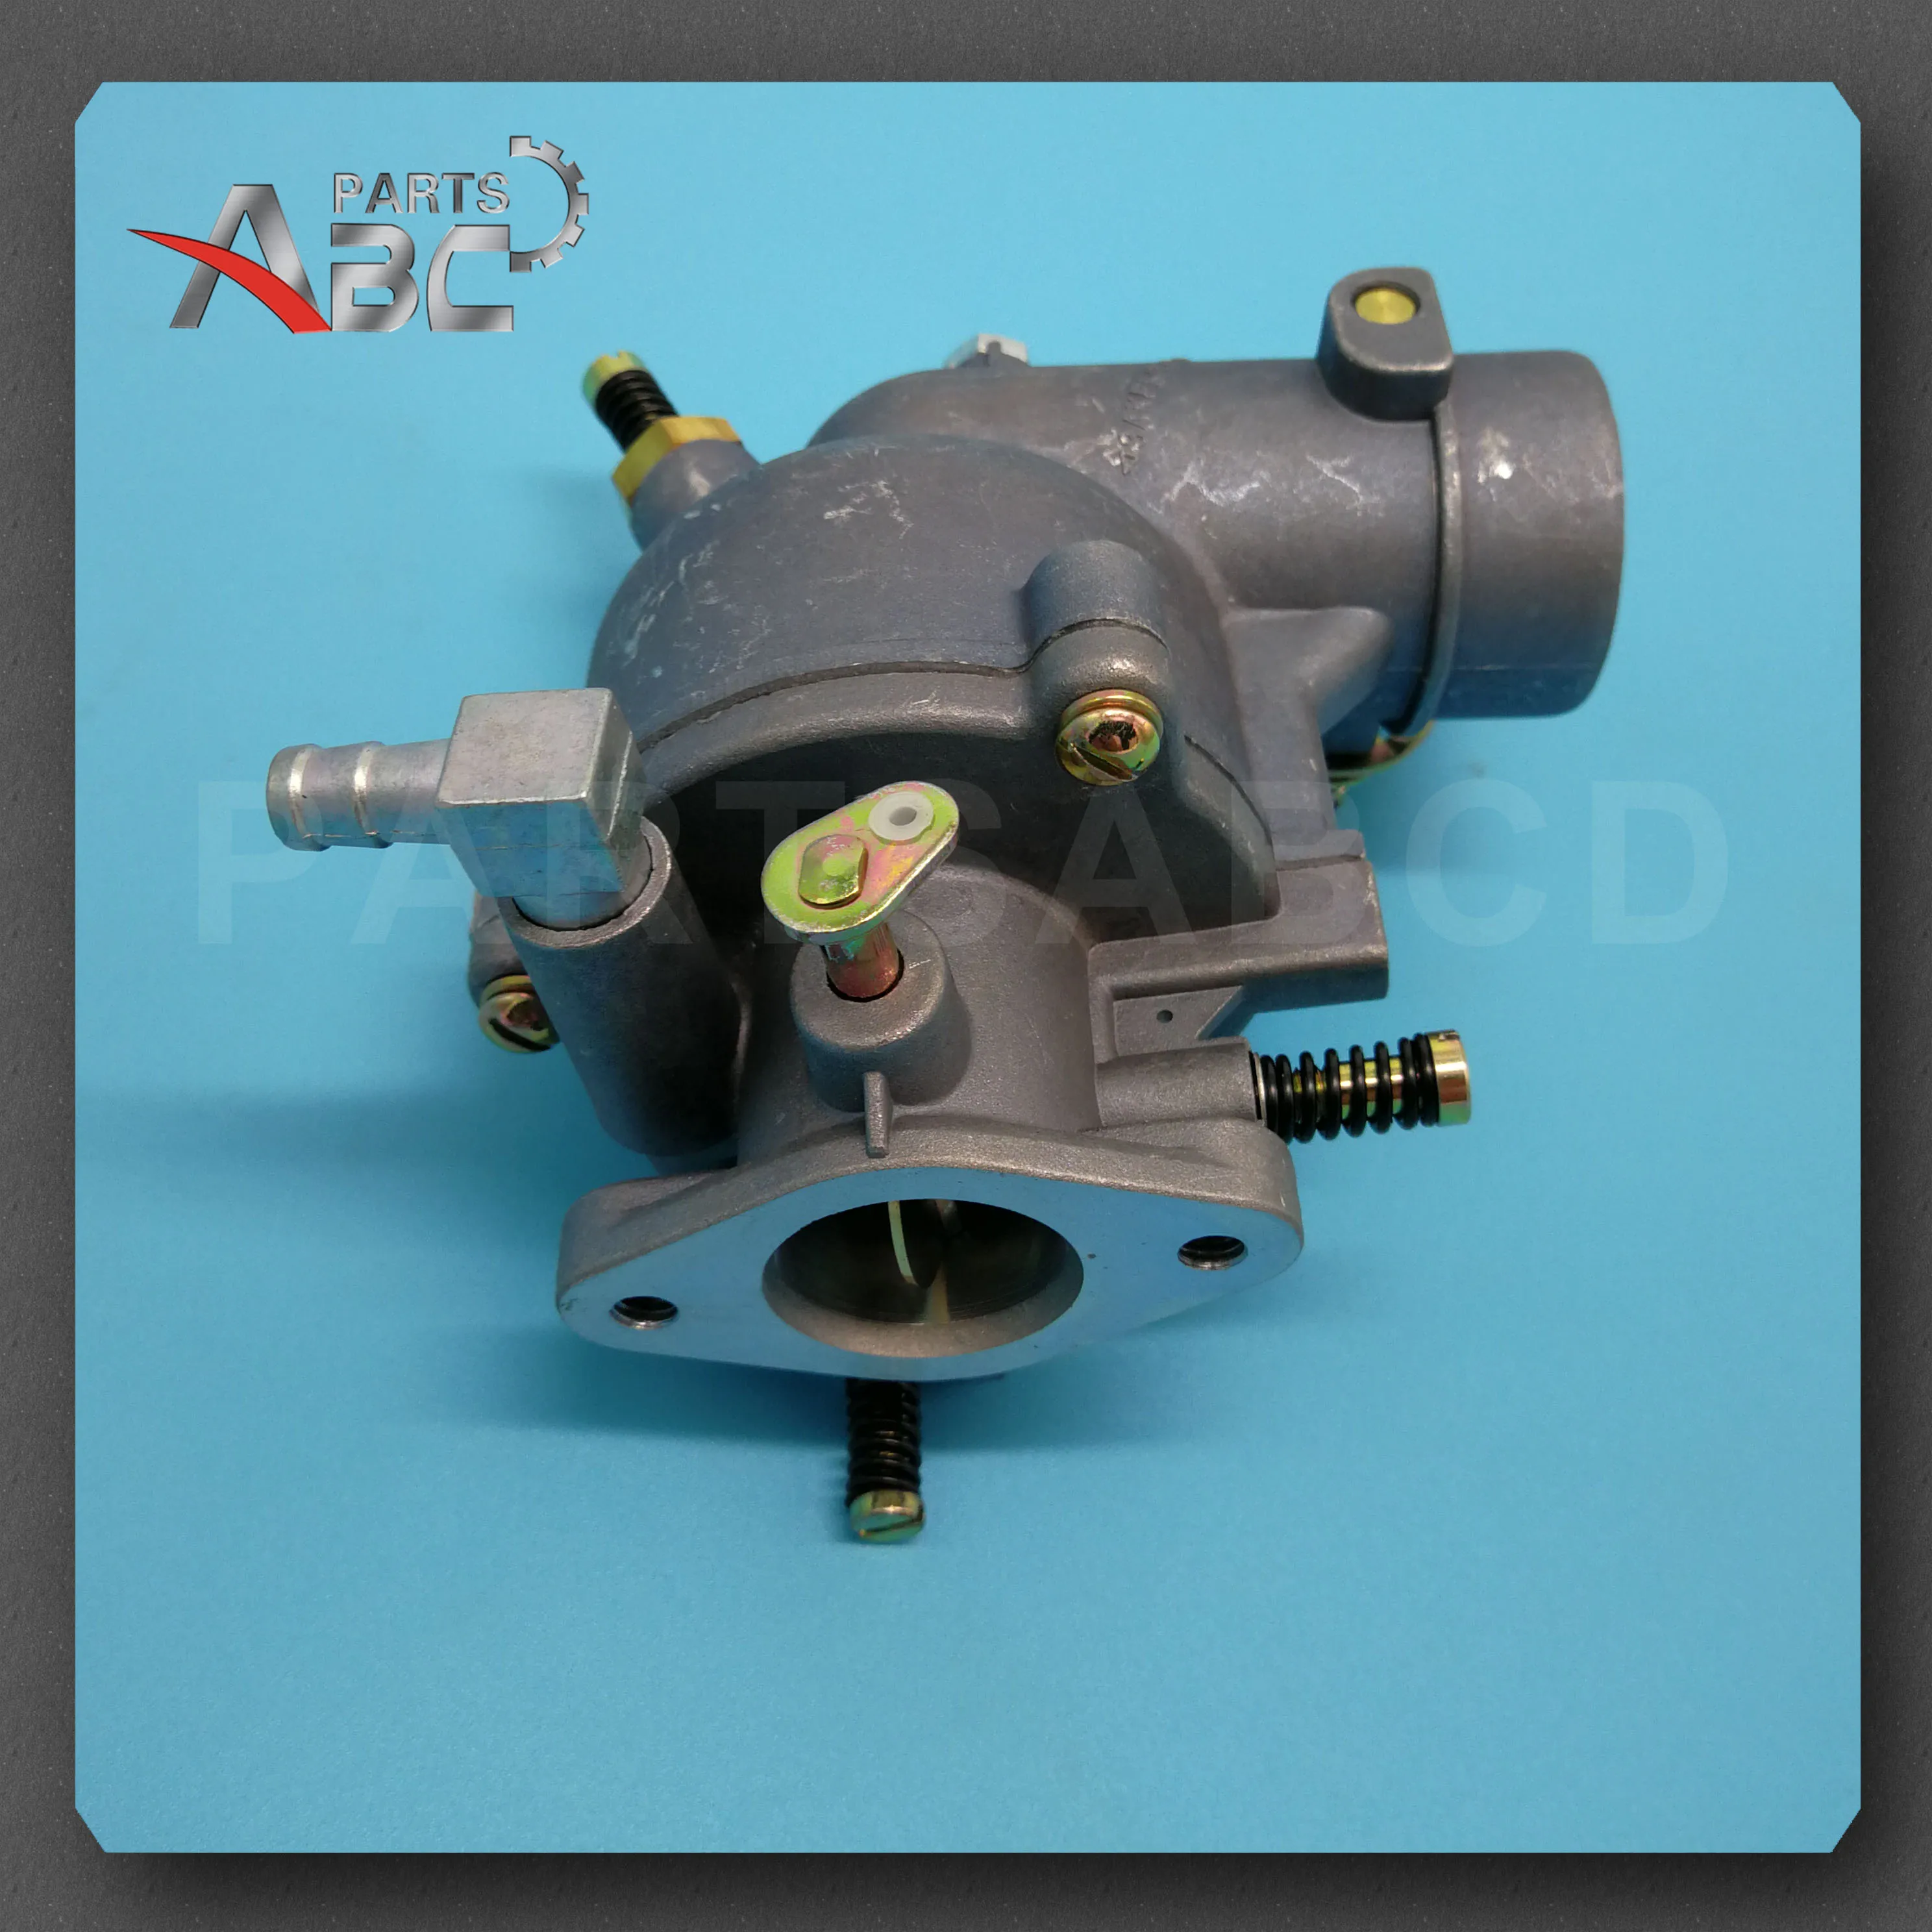 

New Carburetor for Briggs & Stratton 390323 394228 Engine Carb Motor K80 170401 190412 & 195422 7HP 8HP 9HP Lawnmowers